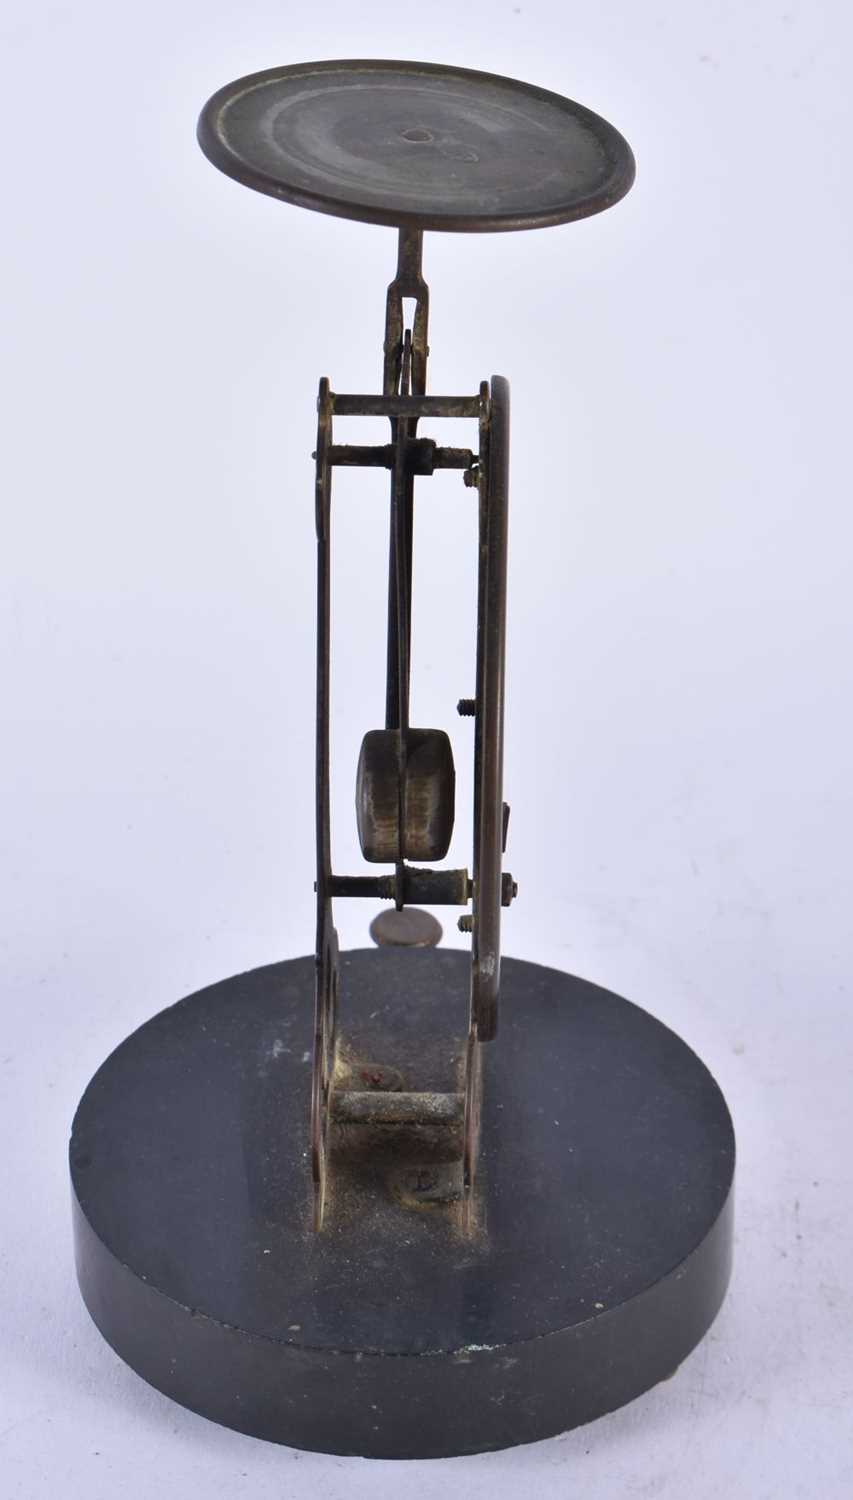 A Vintage Postal Scales with a Marble Base. 20cm x 10cm - Image 2 of 3